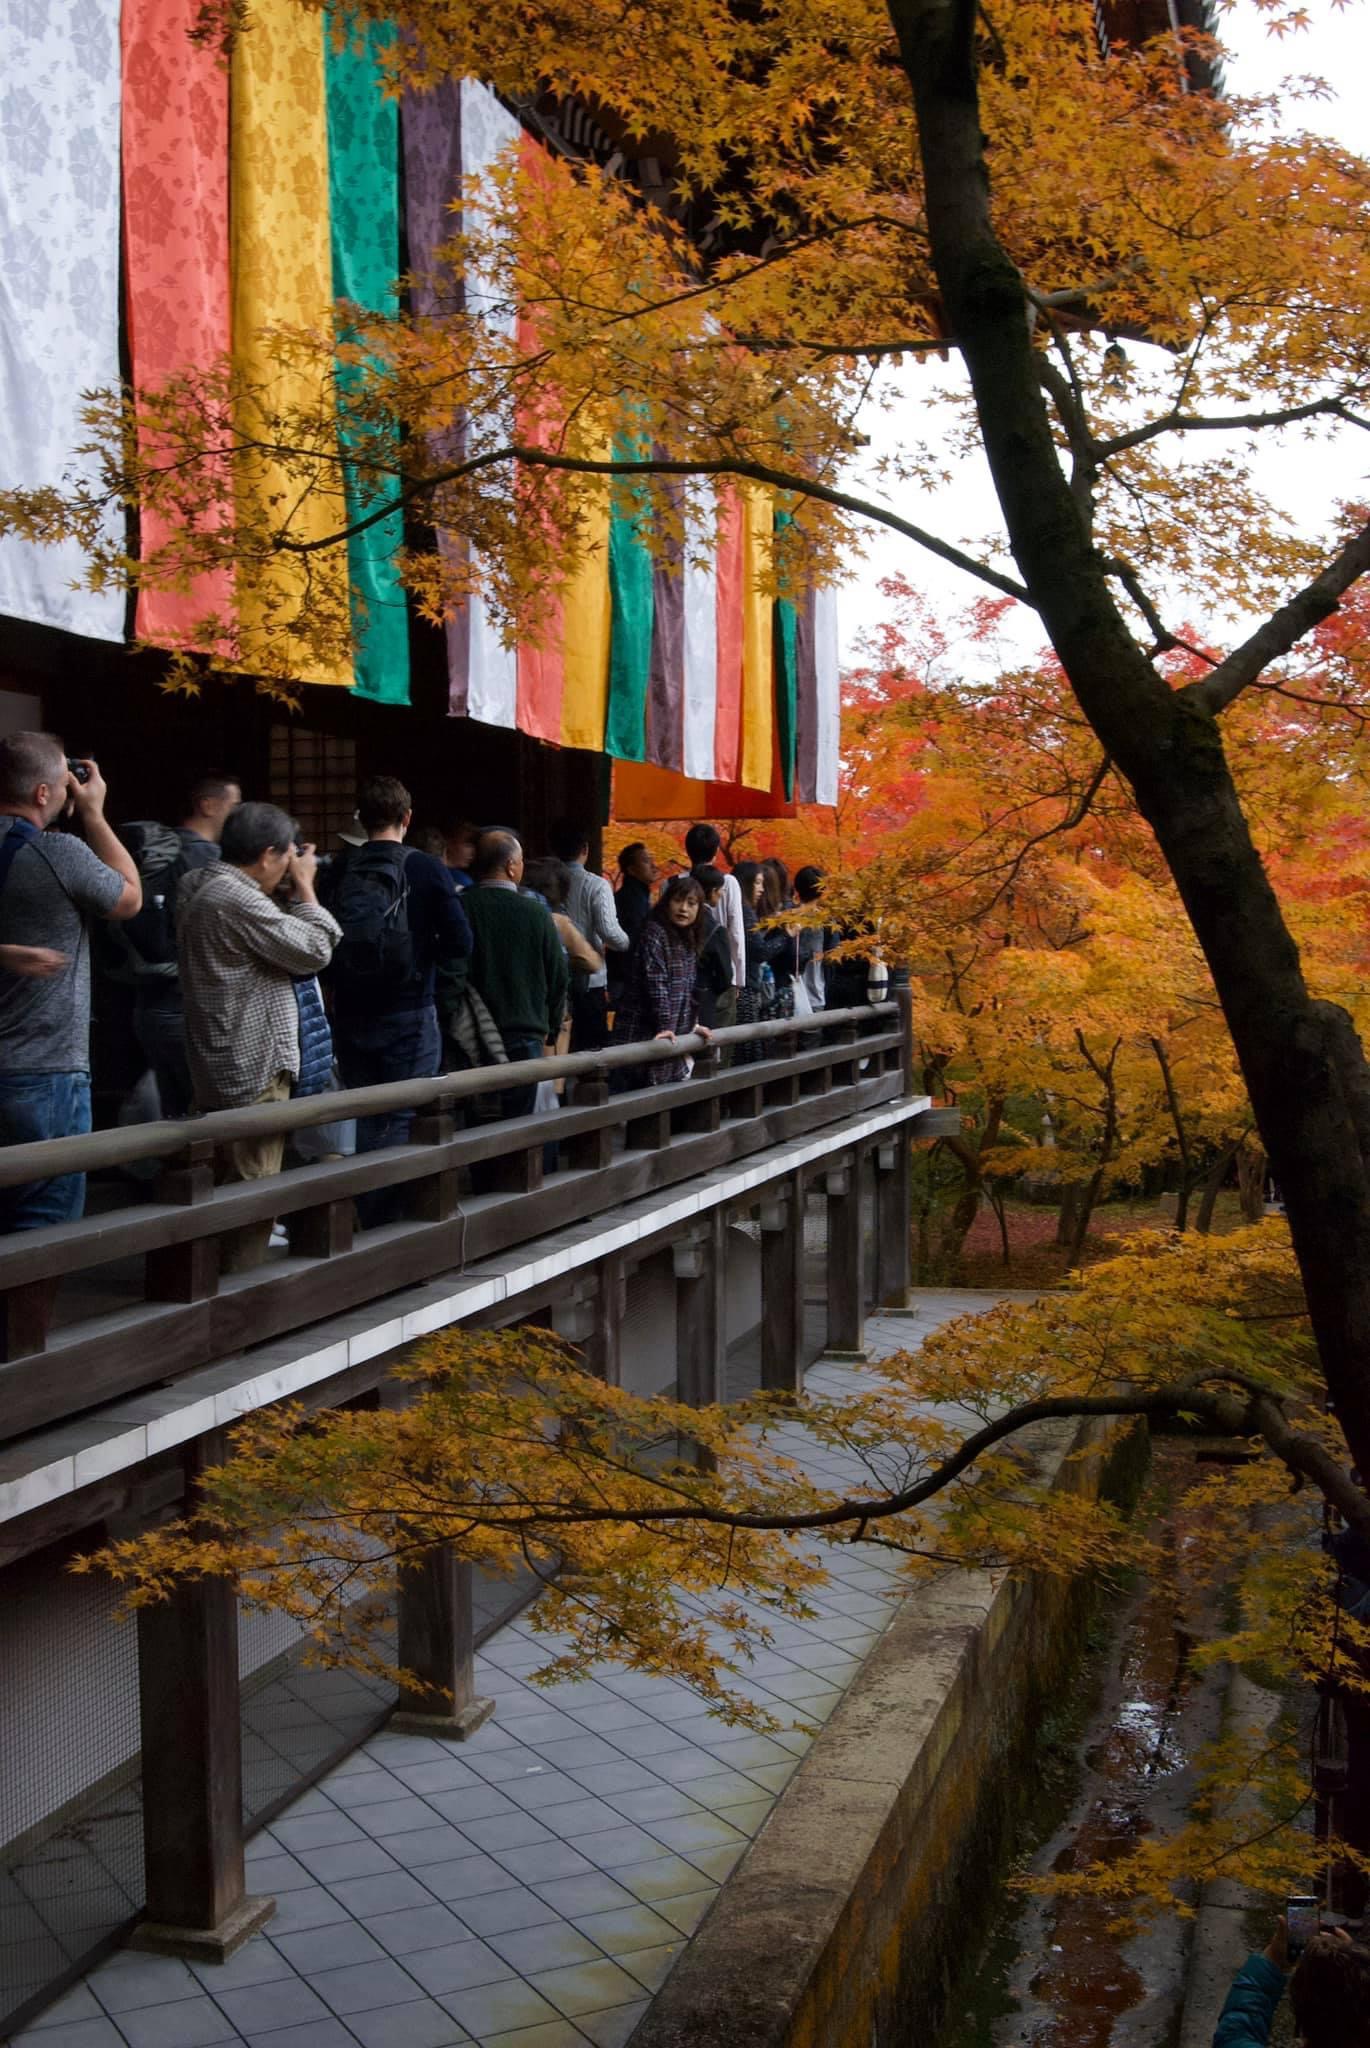 A crowd of people walking along a railed walkway on the outside of a building in Nara Japan. a rainbow of colorful flags hang down from the eves of the roof and the leaves on the japanese maple trees are bright orange. One woman is leaning on the railing looking back against the crowd to a man who takes her photo.